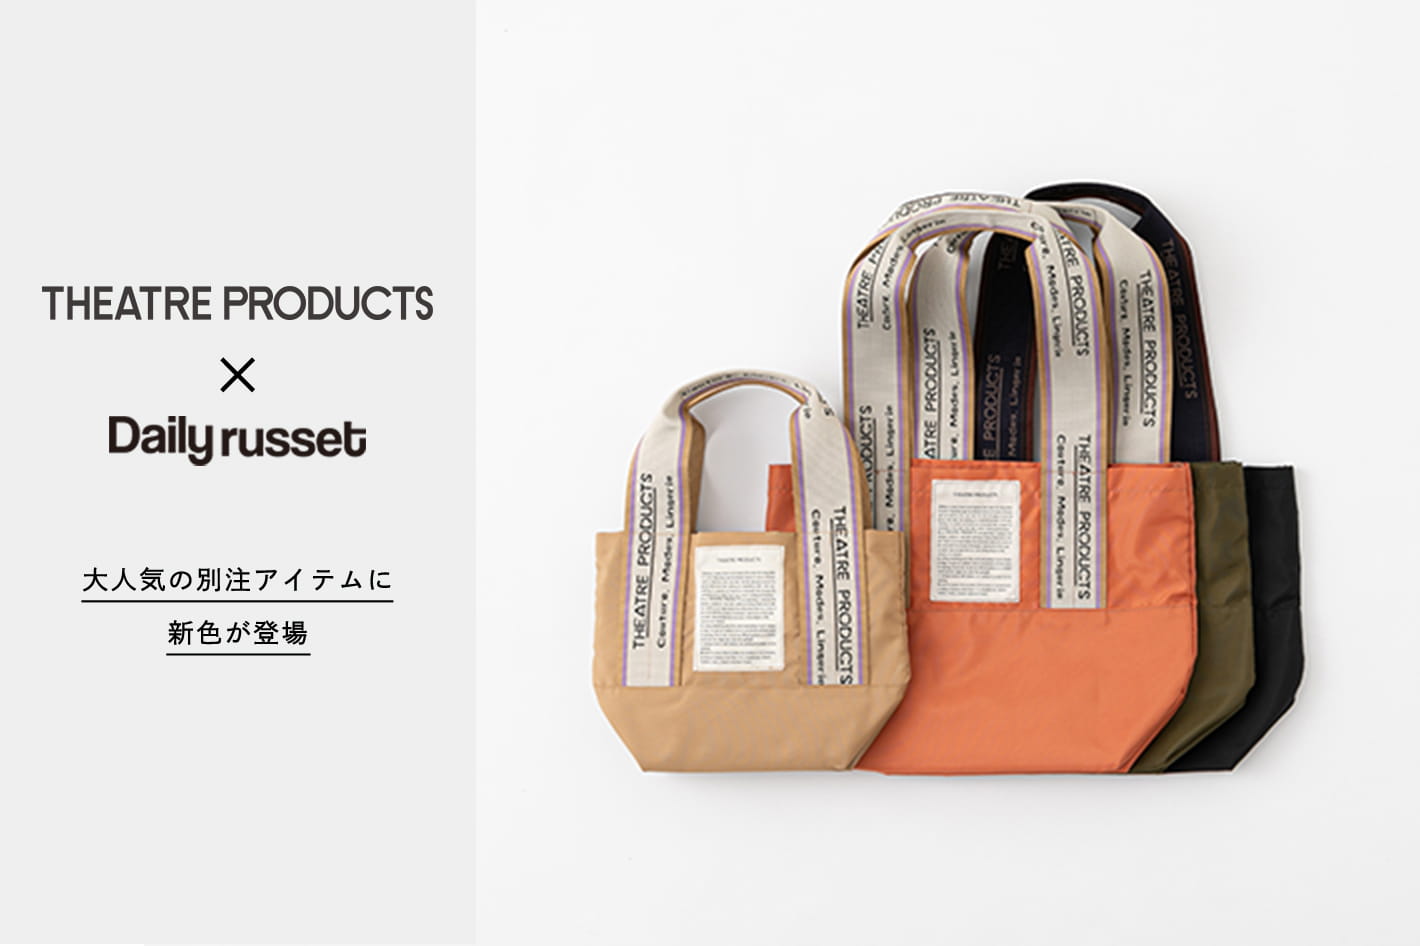 Daily russet 【NEW ARRIVAL】人気のTHEATRE PRODUCTS別注アイテムに新色が登場！